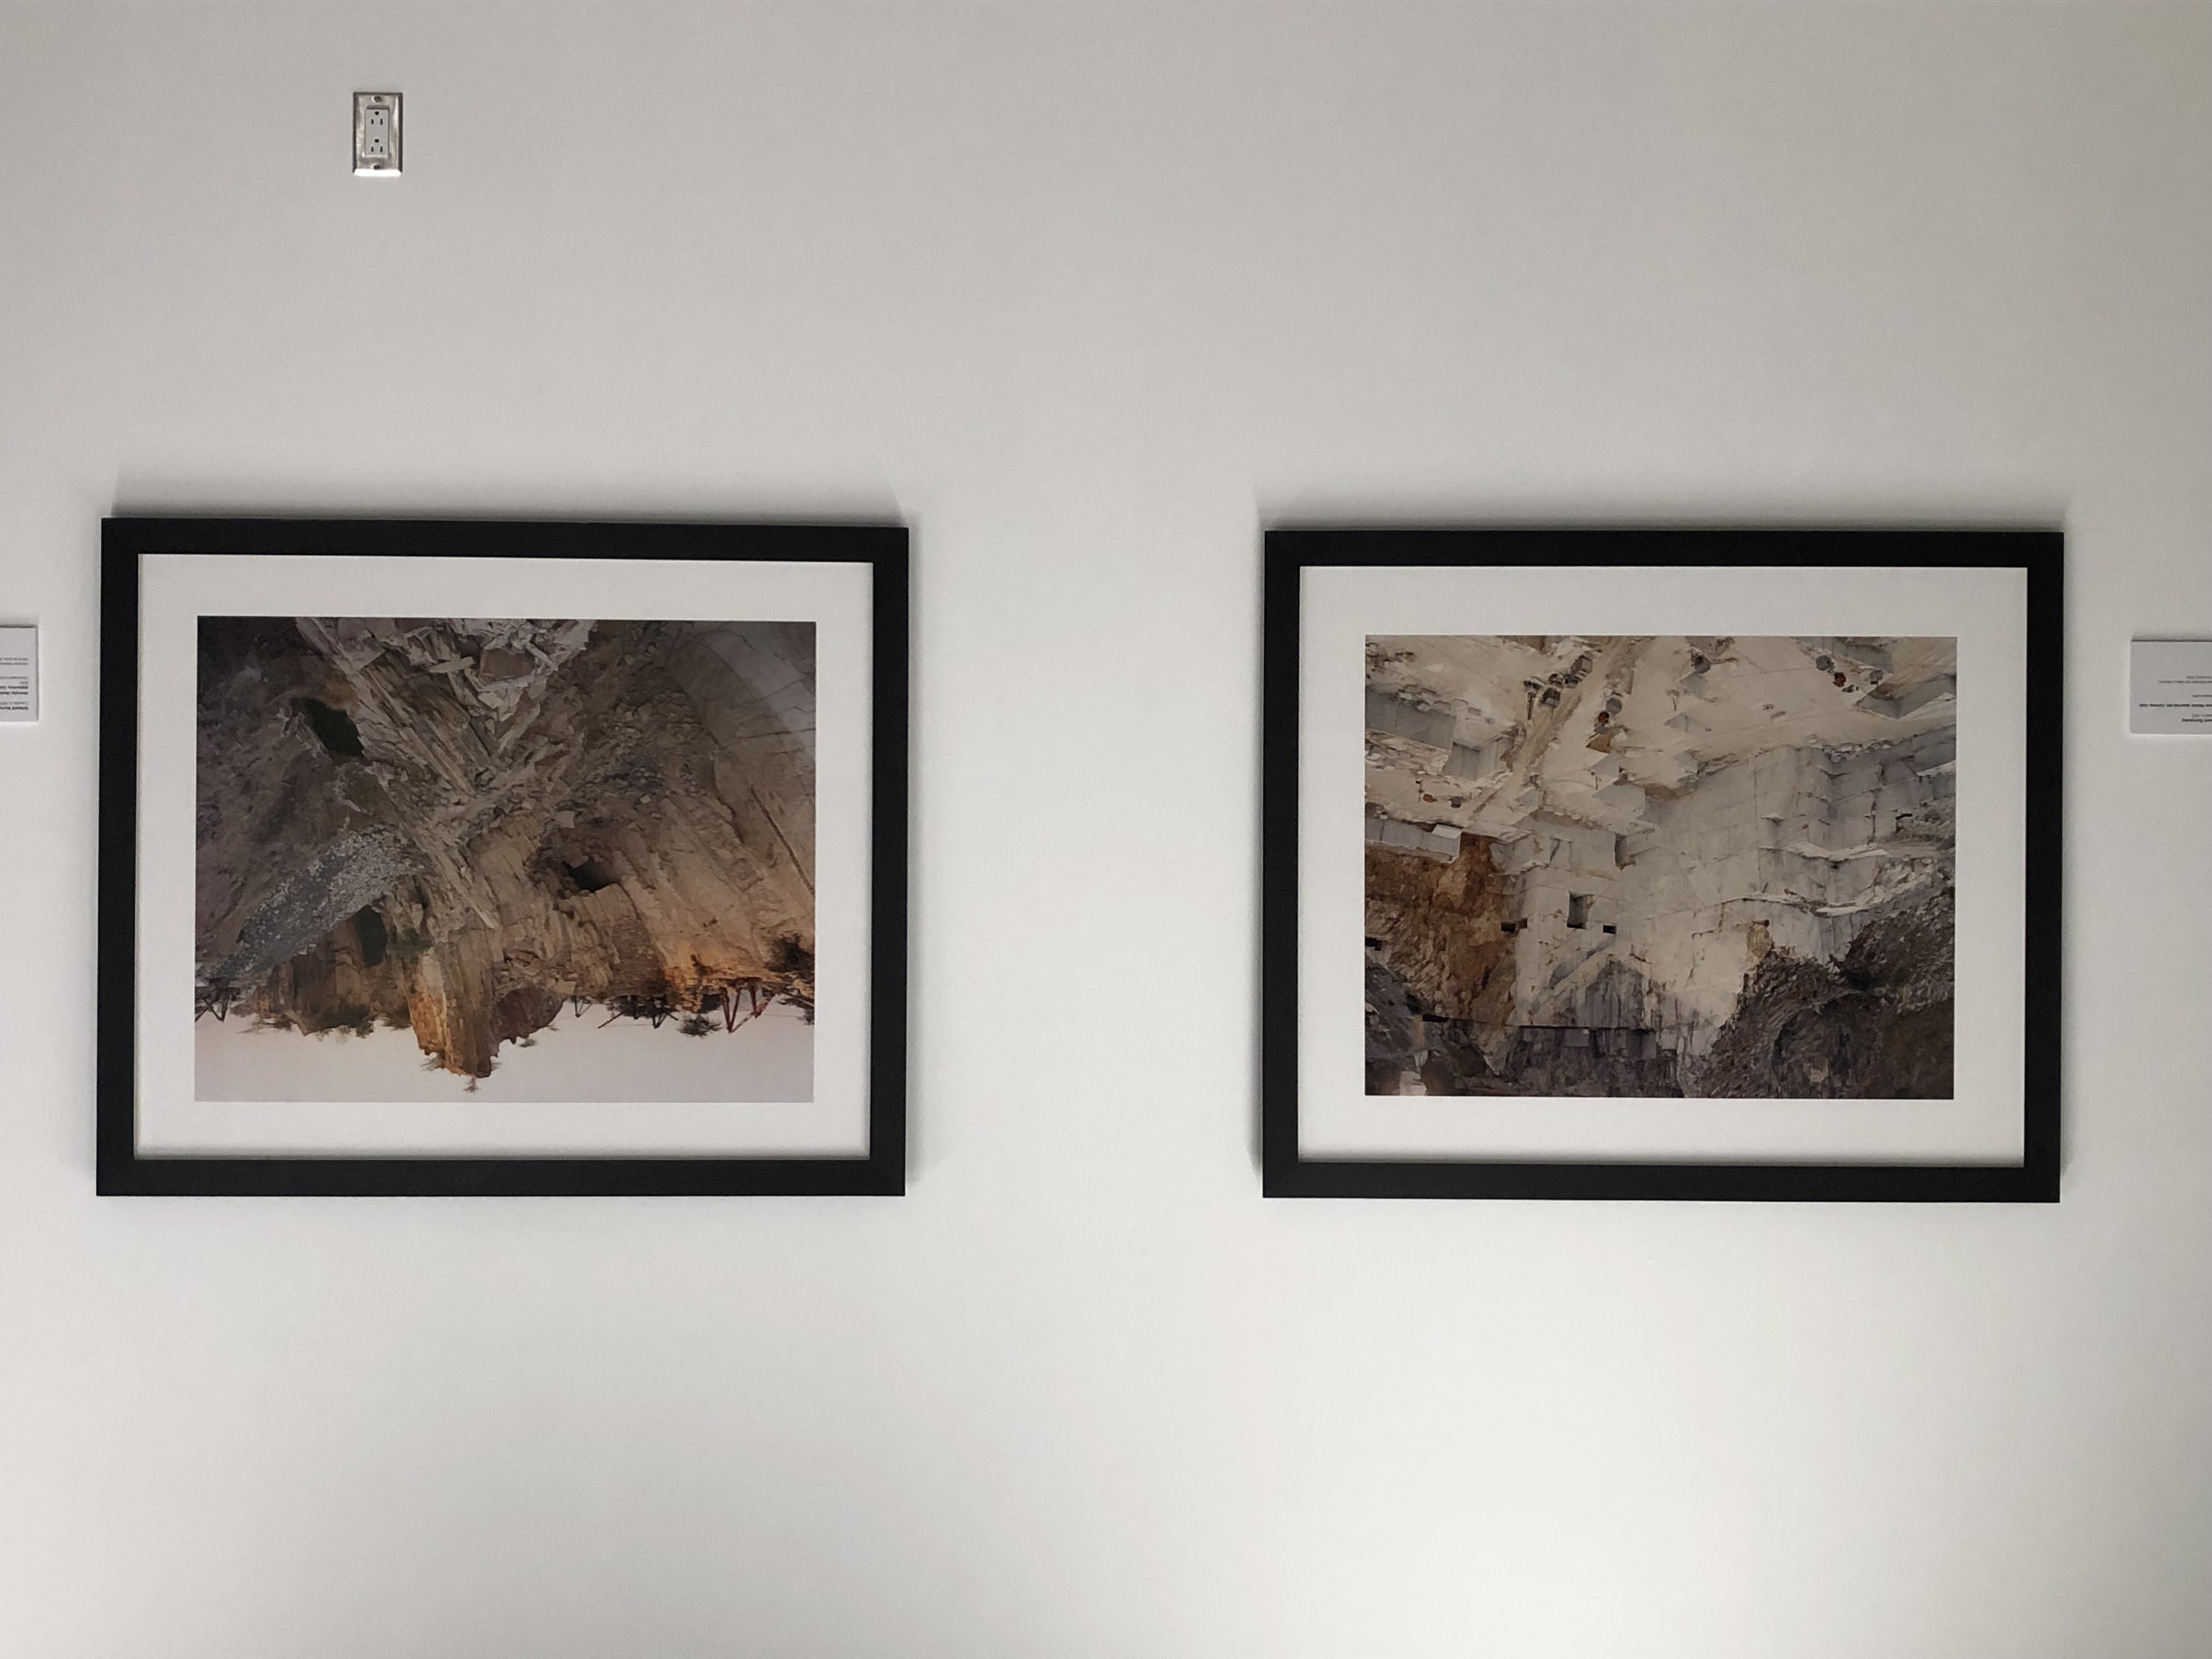 Installation view of two Burtynsky prints of marble quarries in black frames on a white wall